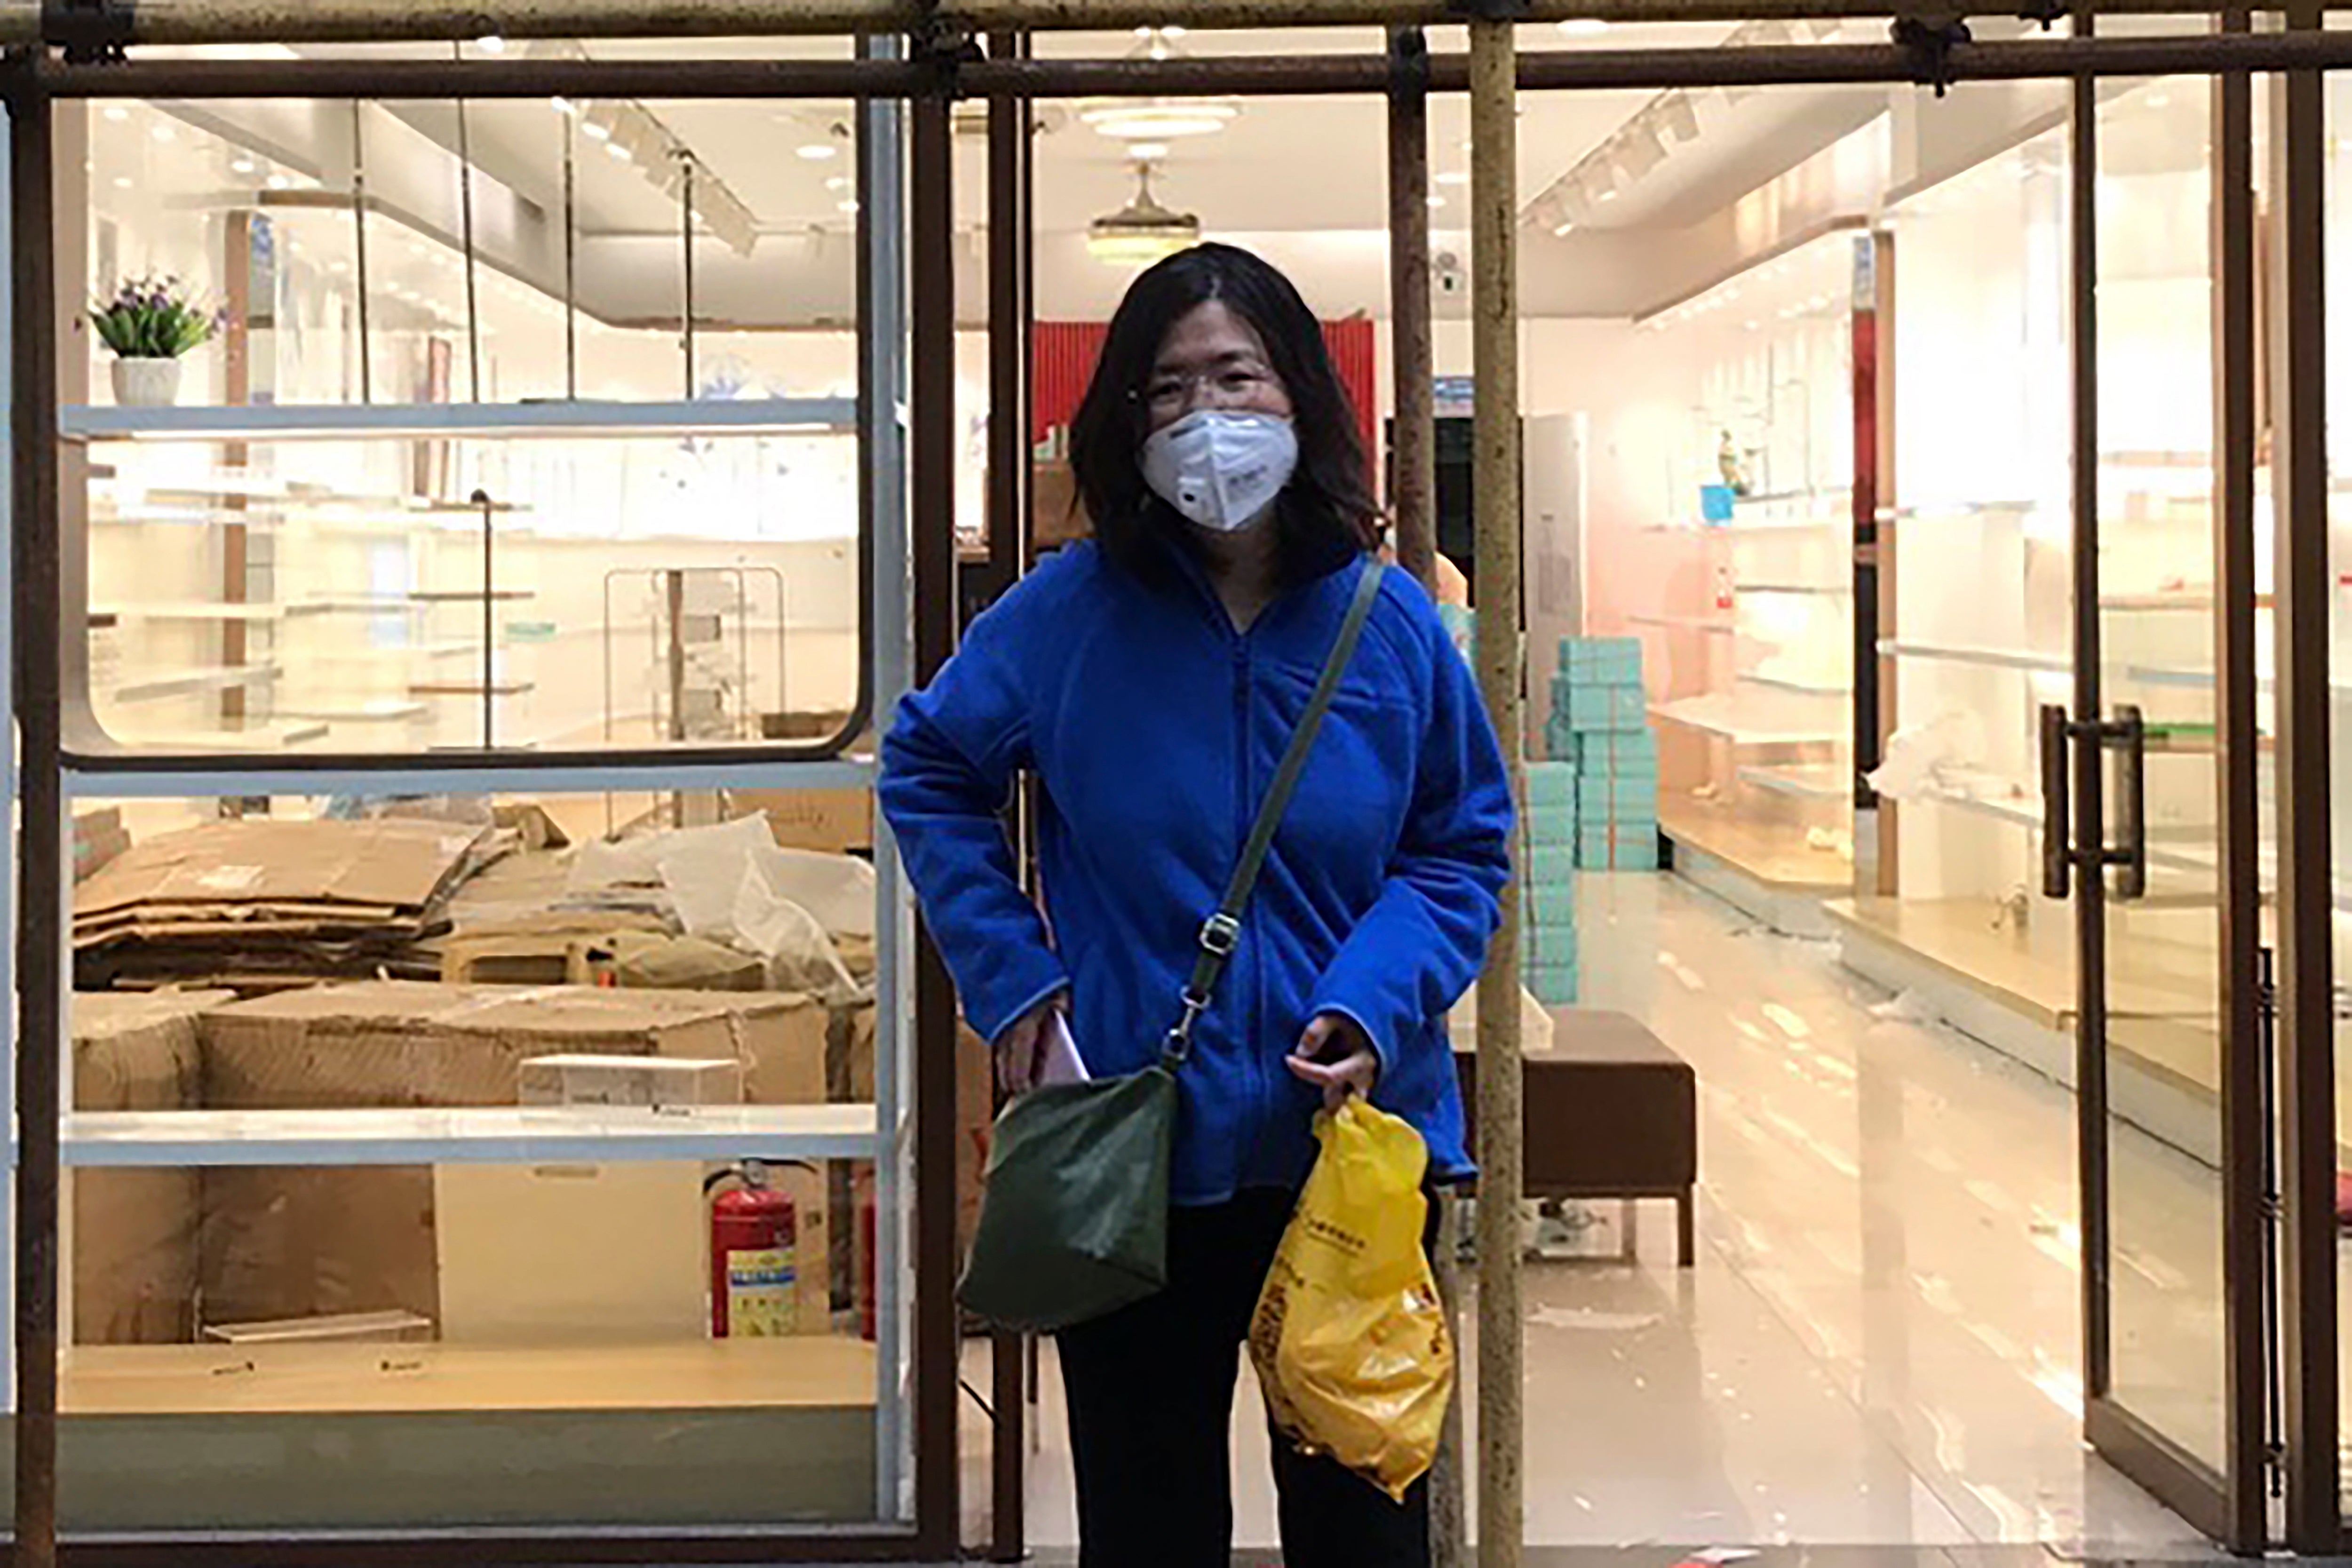 File: Chinese citizen journalist Zhang Zhan who was sentenced for reporting on authorities handling of the Covid outbreak in Wuhan, is reportedly in ill health in prison